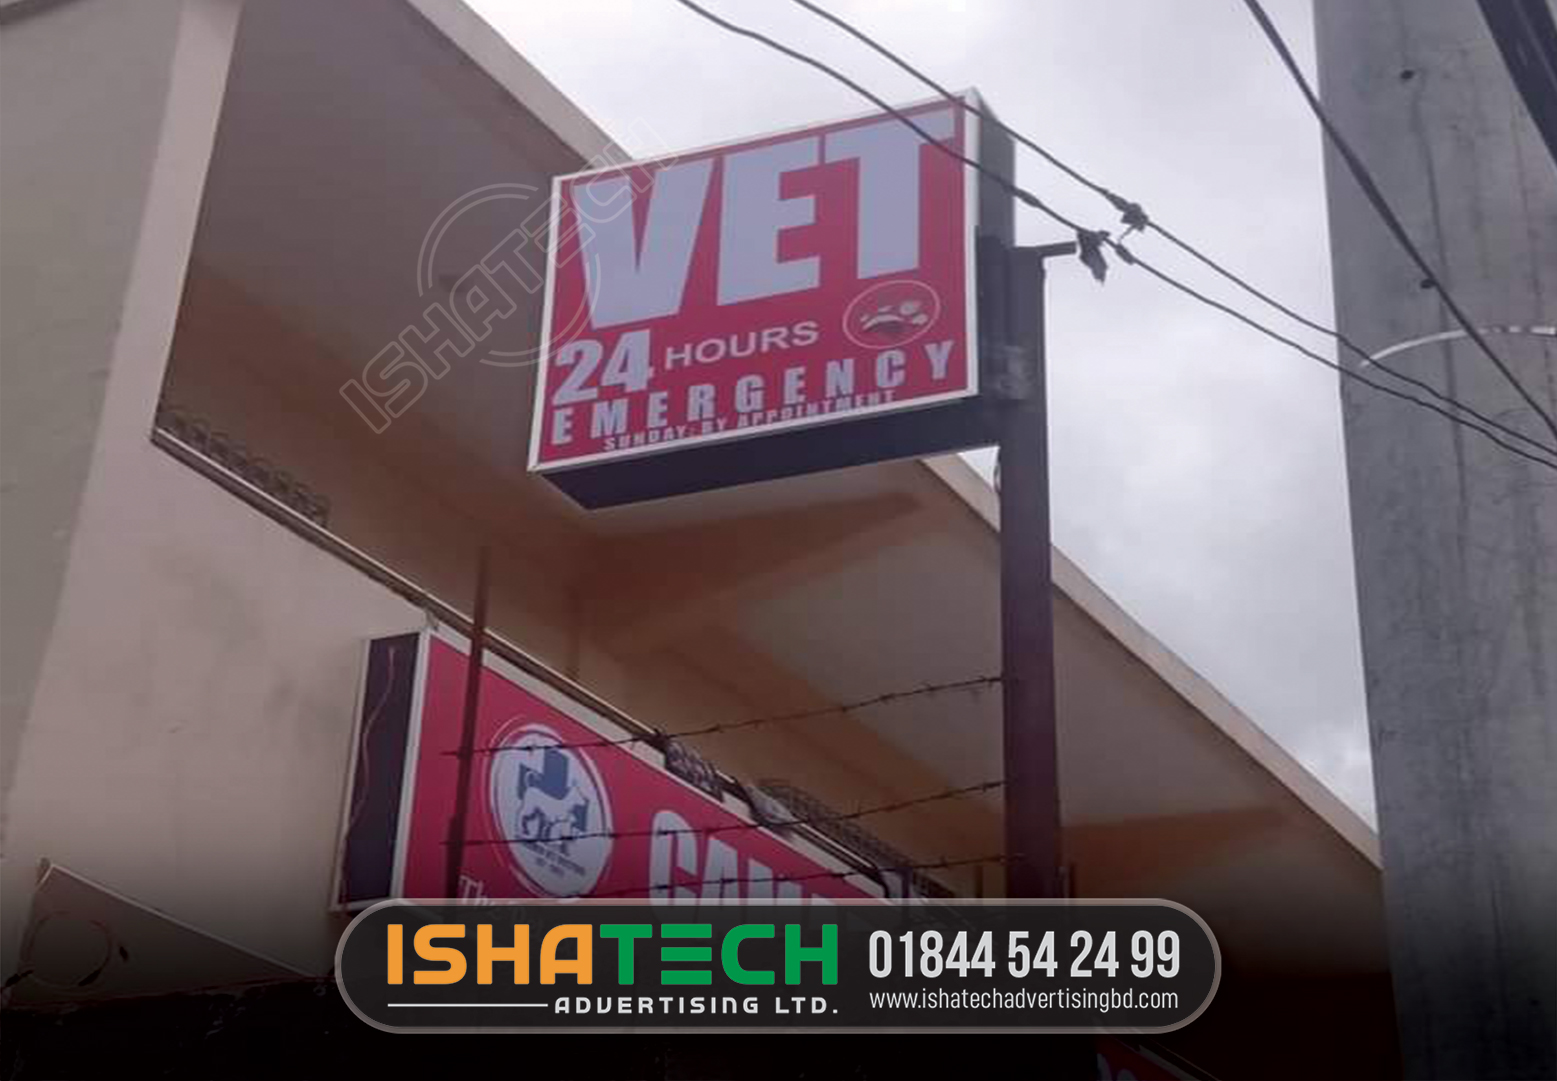 VET 24 EMERGENCY PANA LIGHTING SIGNBOARD MAKING BY LED SIGNAGE, SIGNBOARD COMPANY BD | BILLBOARD COMPANY BD, NEON SIGN BD